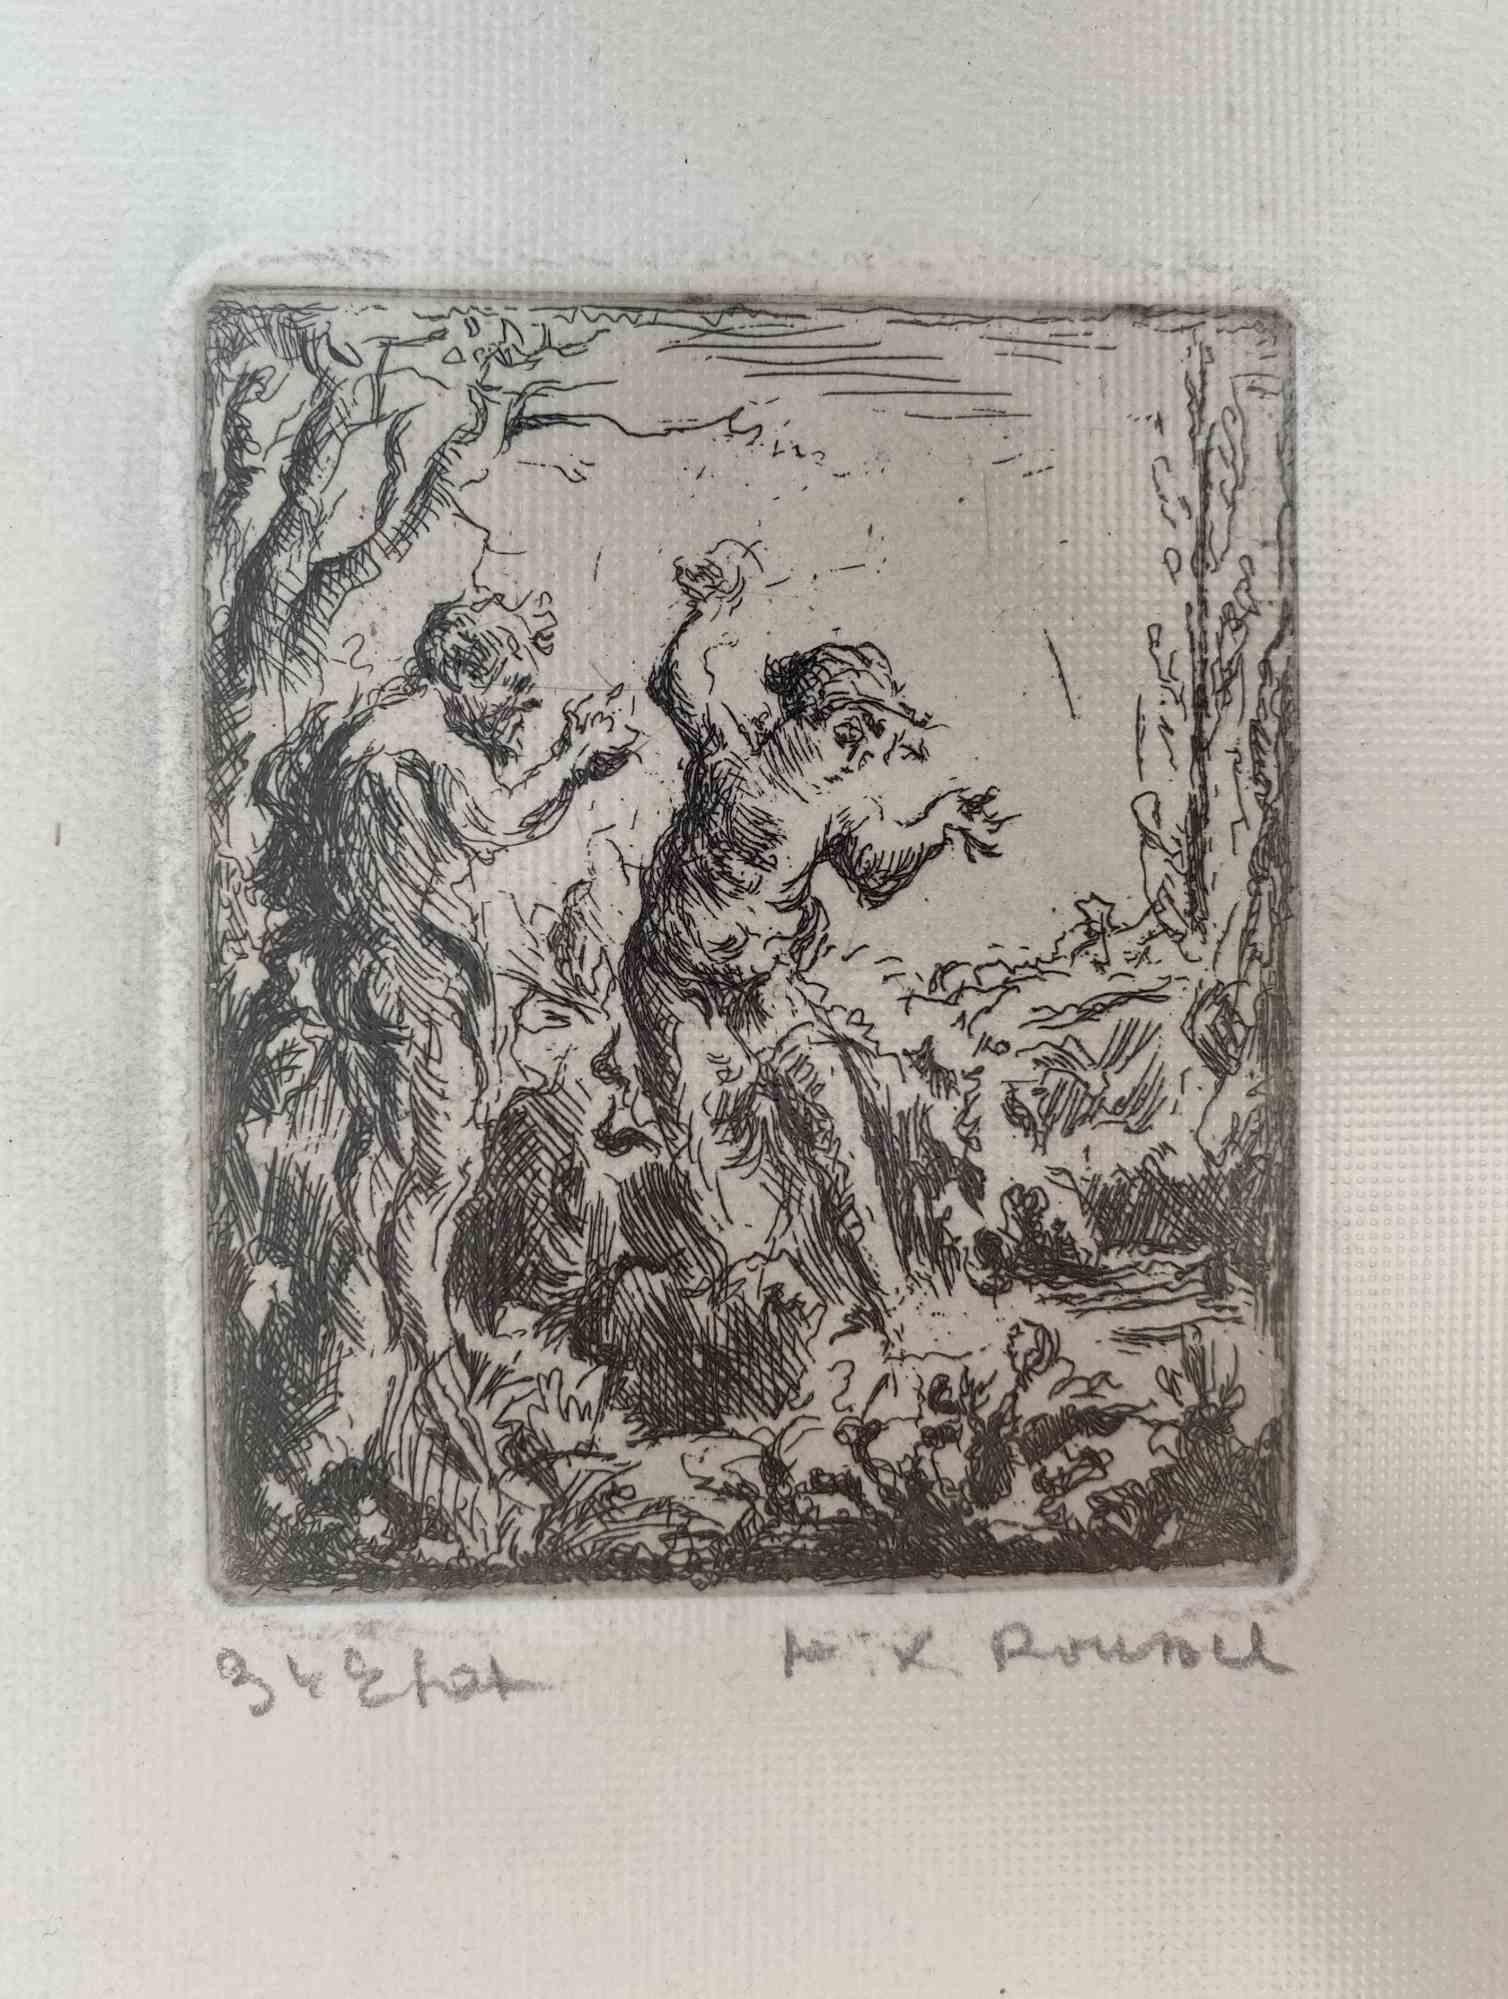 Nude in Woods is an original etching print artwork on ivory-colored paper realized by Ker-Xavier Roussel in 1920 ca.

Hand-Signed on the lower right margin. 

Very Good conditions.

Ker-Xavier Roussel (Lorry-les-Metz,1867 – L'Étang-La-Ville, 1944),